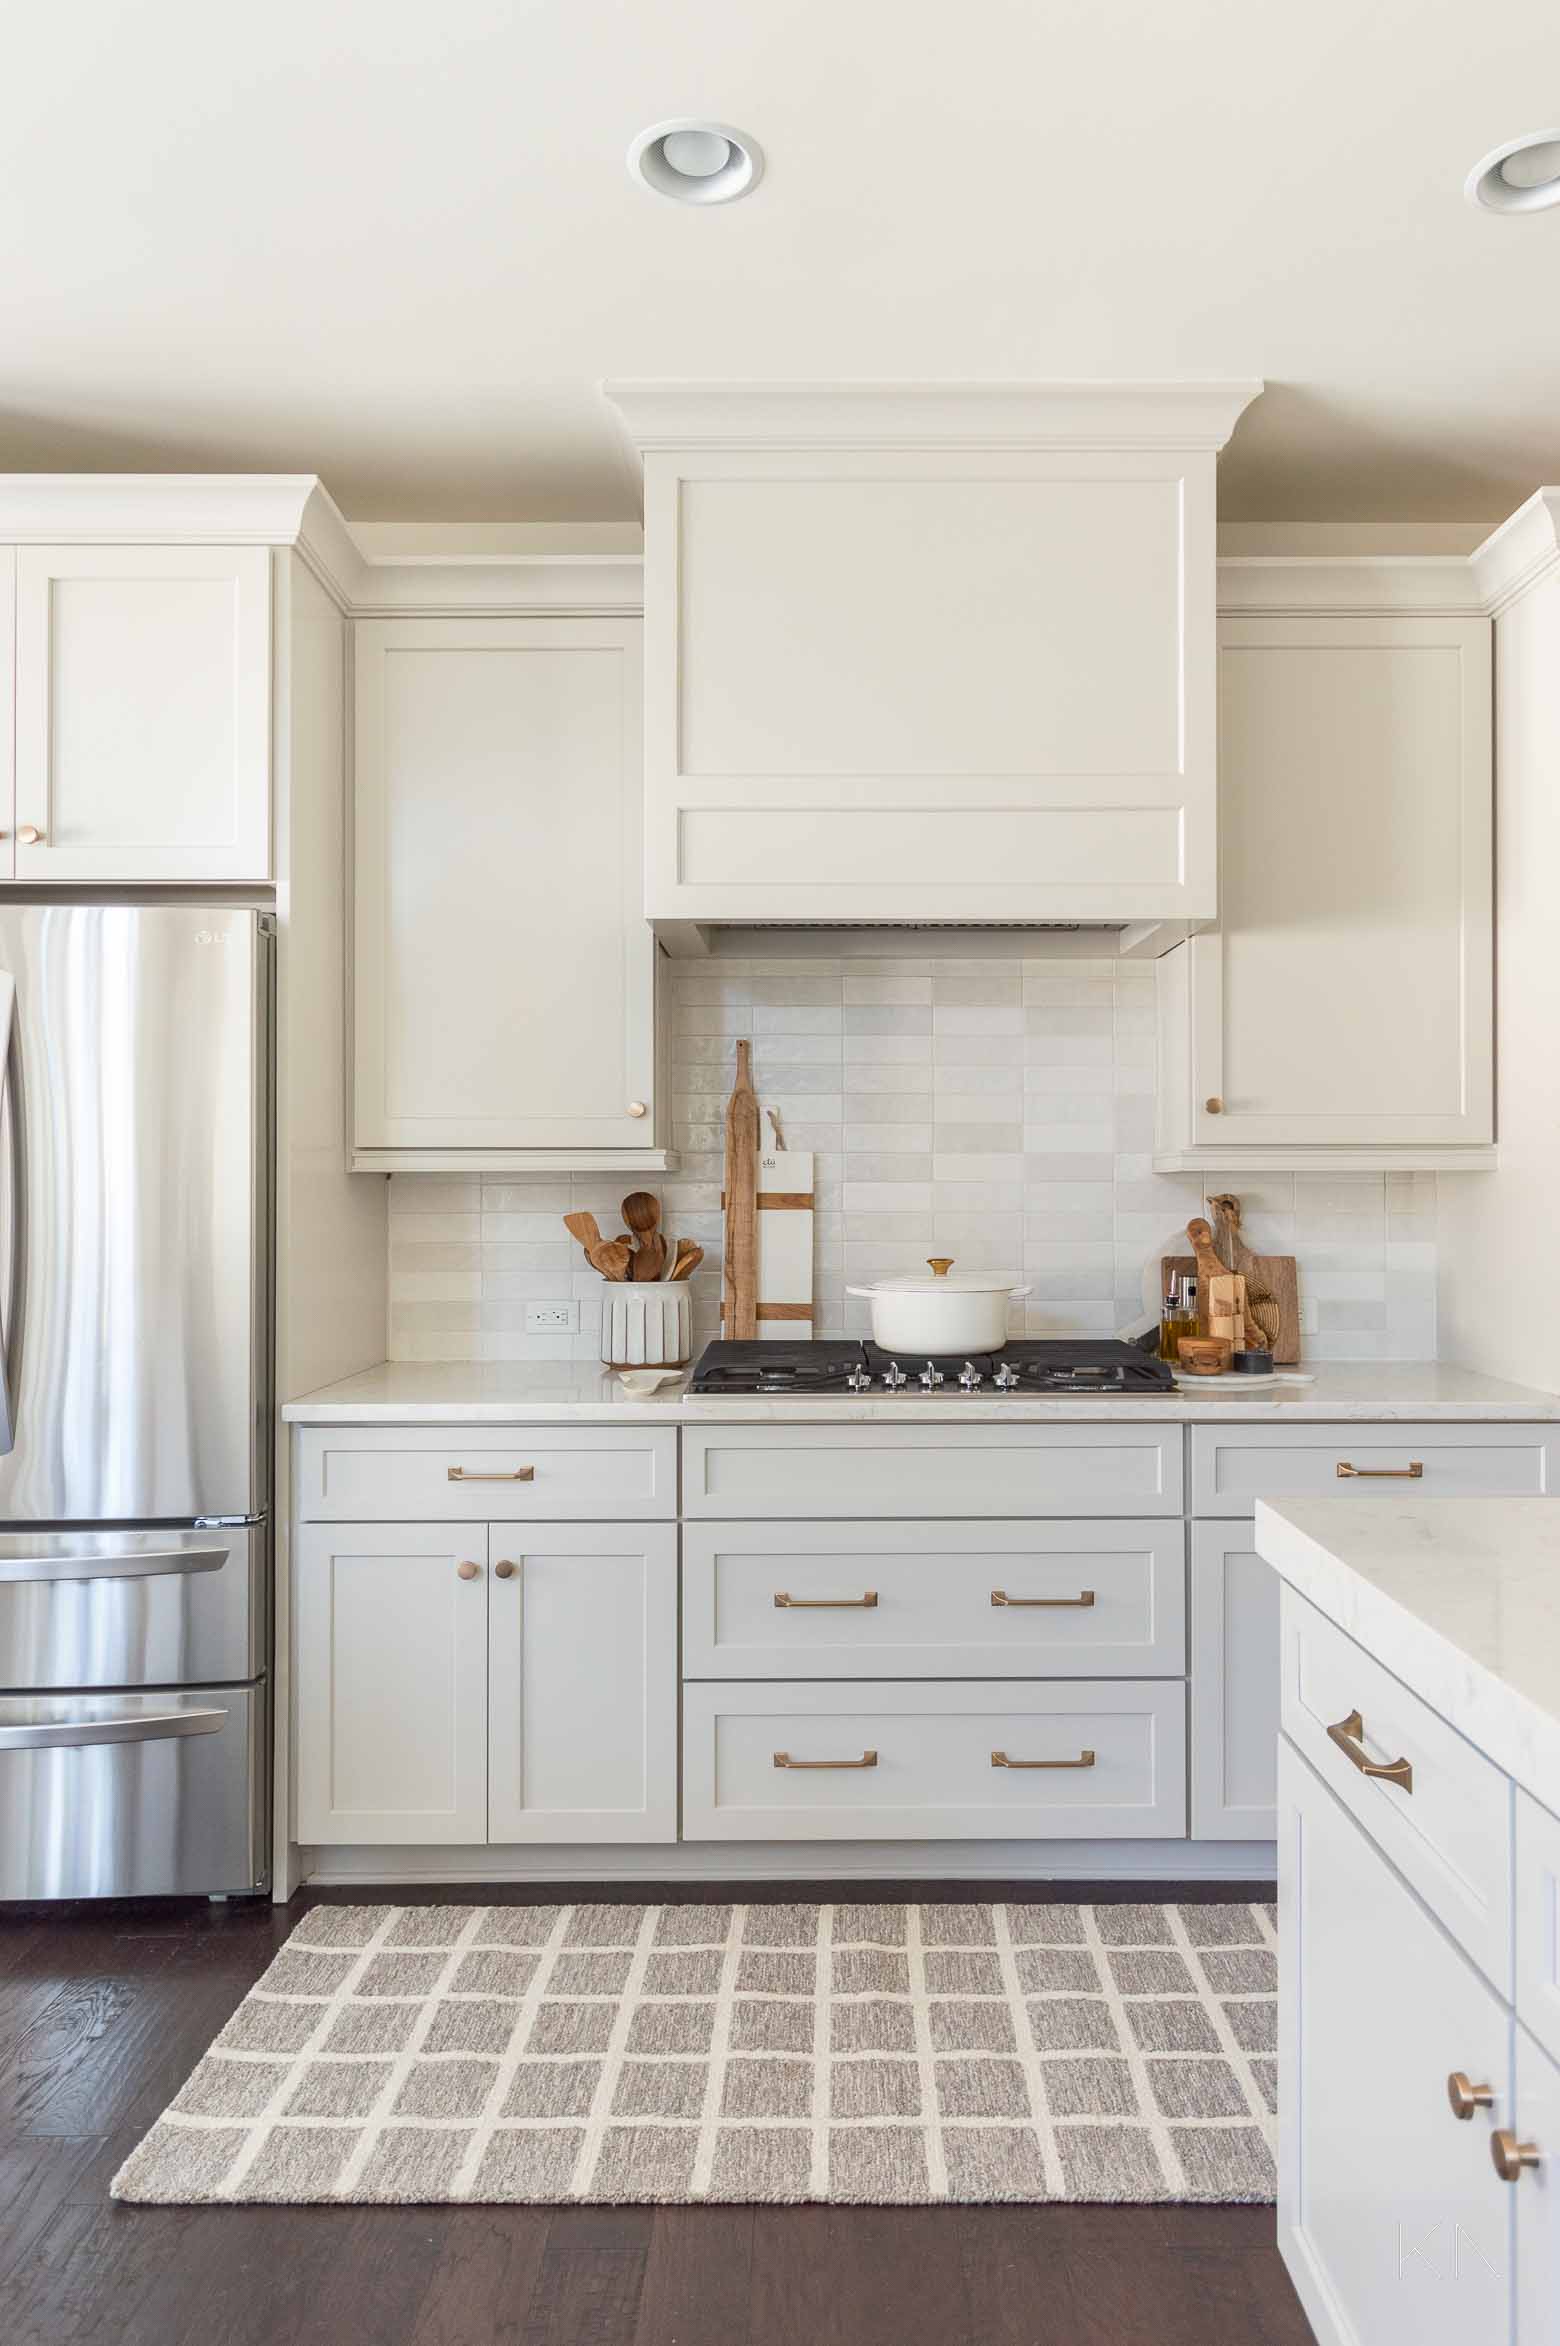 Warm Light Gray Kitchen Cabinet Makeover with Agreeable Gray Sherwin Williams Paint and Shaker Cabinet Fronts